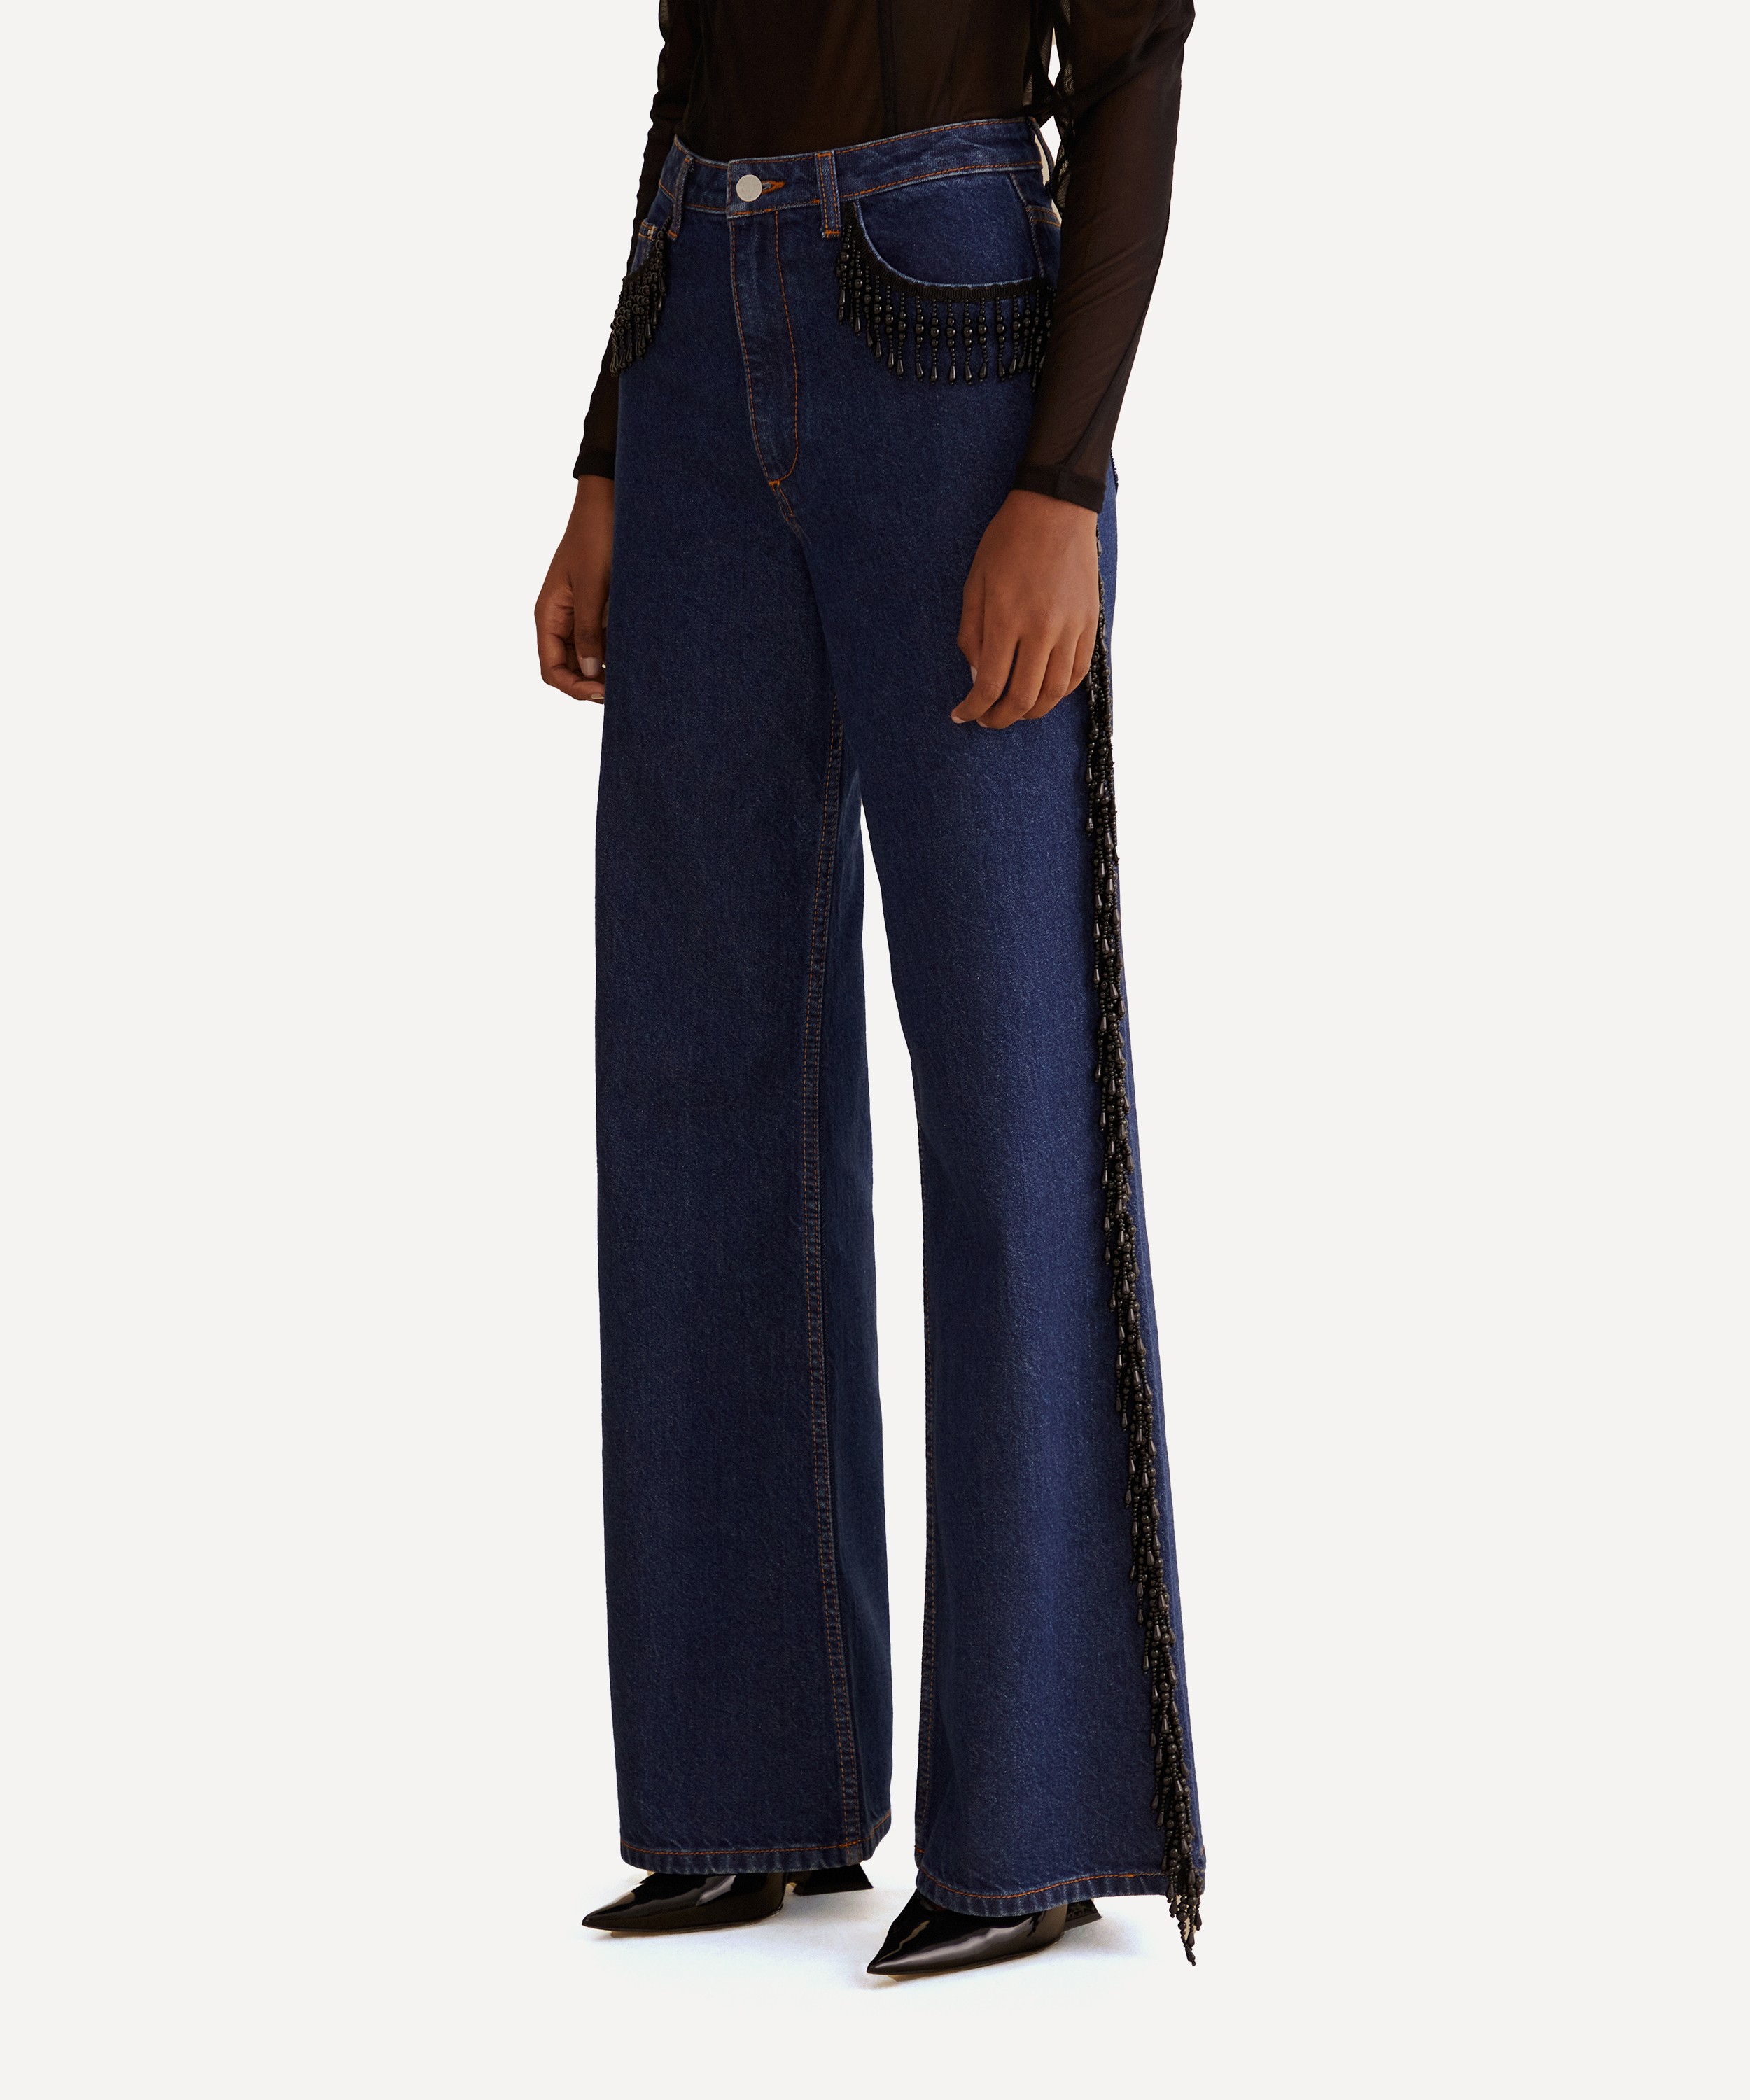 FARM Rio - Fringe Beaded Wide Jeans image number 3